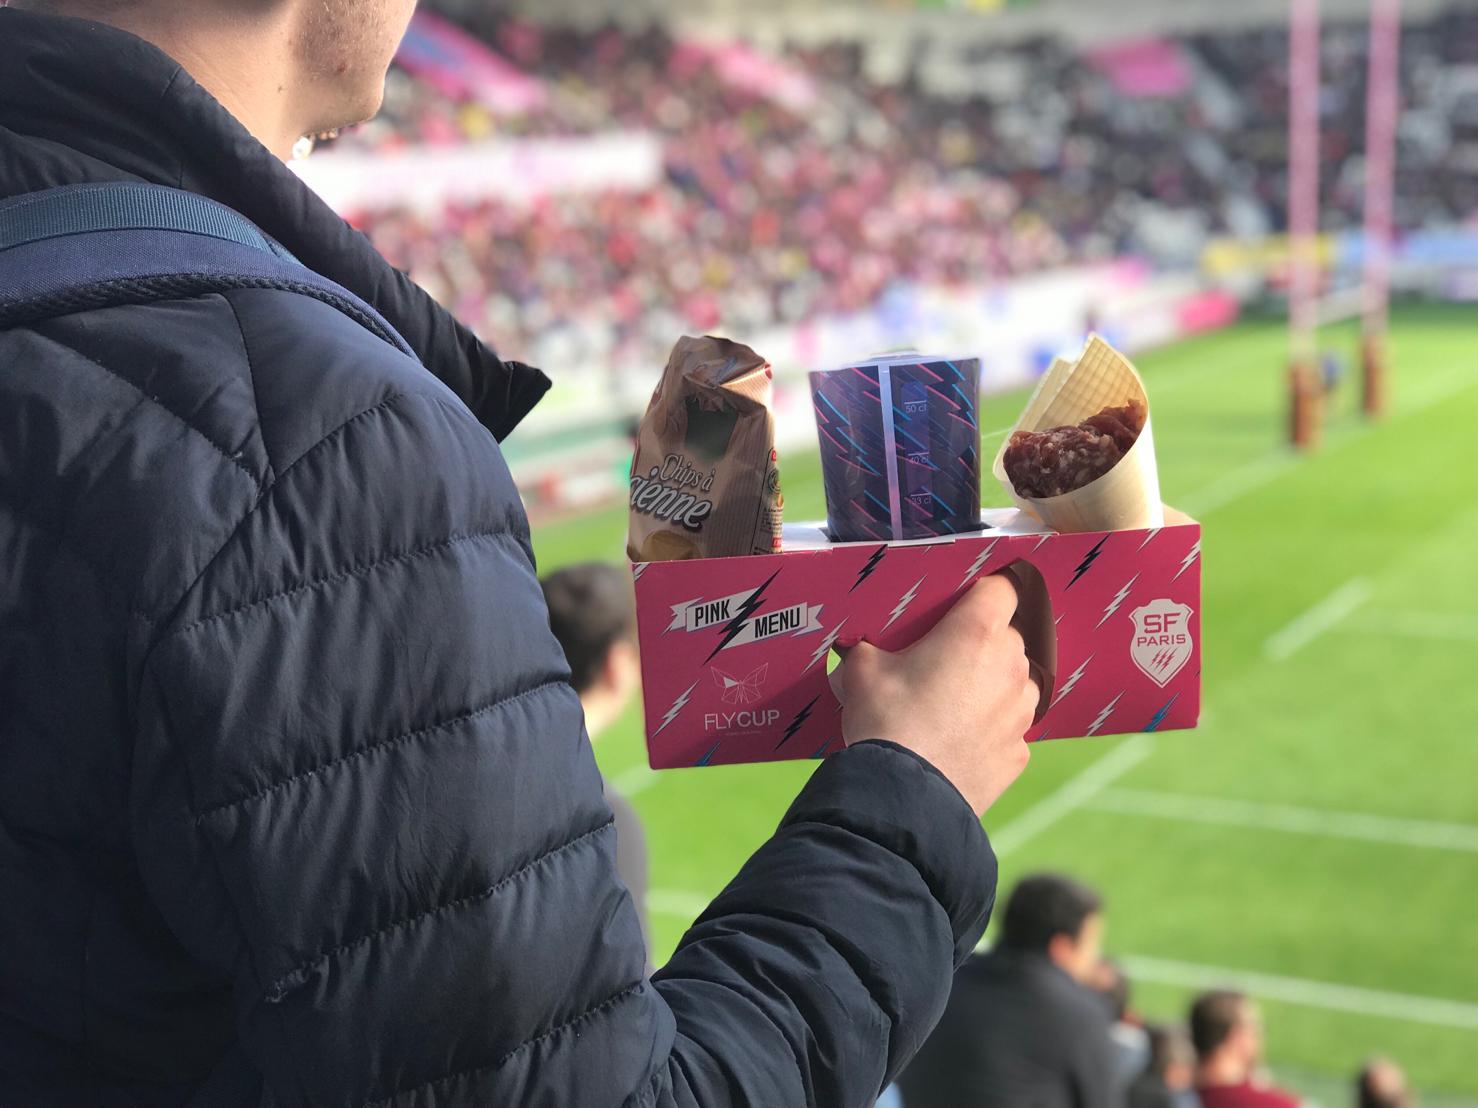 flycup-stade-francais-rugby-fan-experience-food